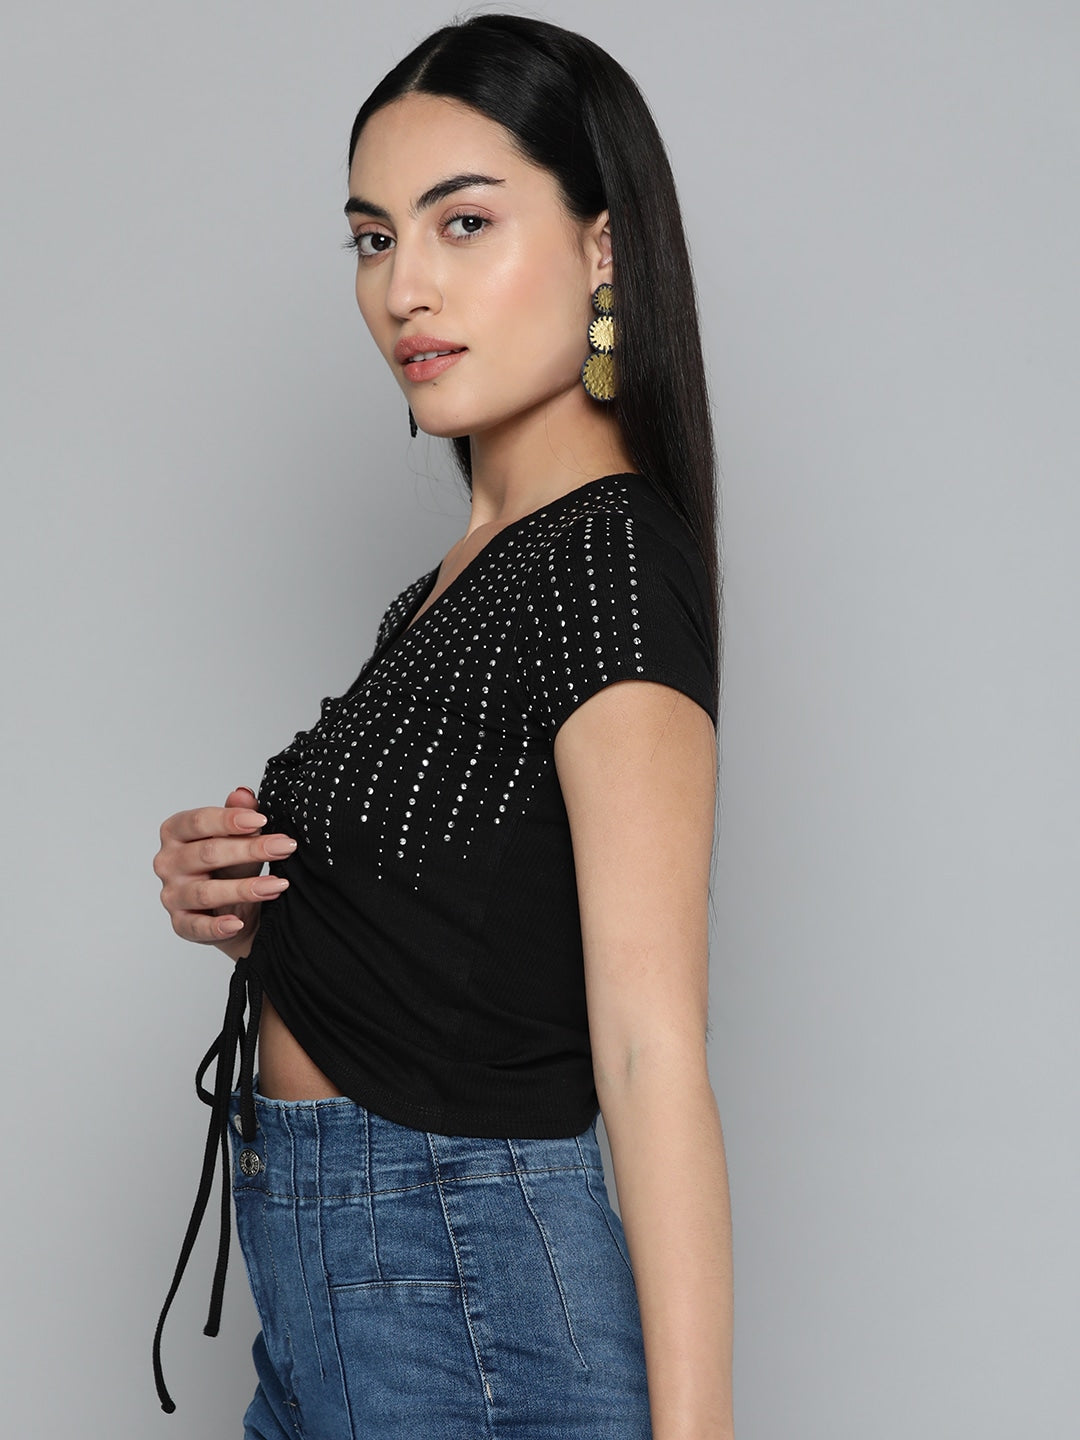 Black Fitted Crop Top